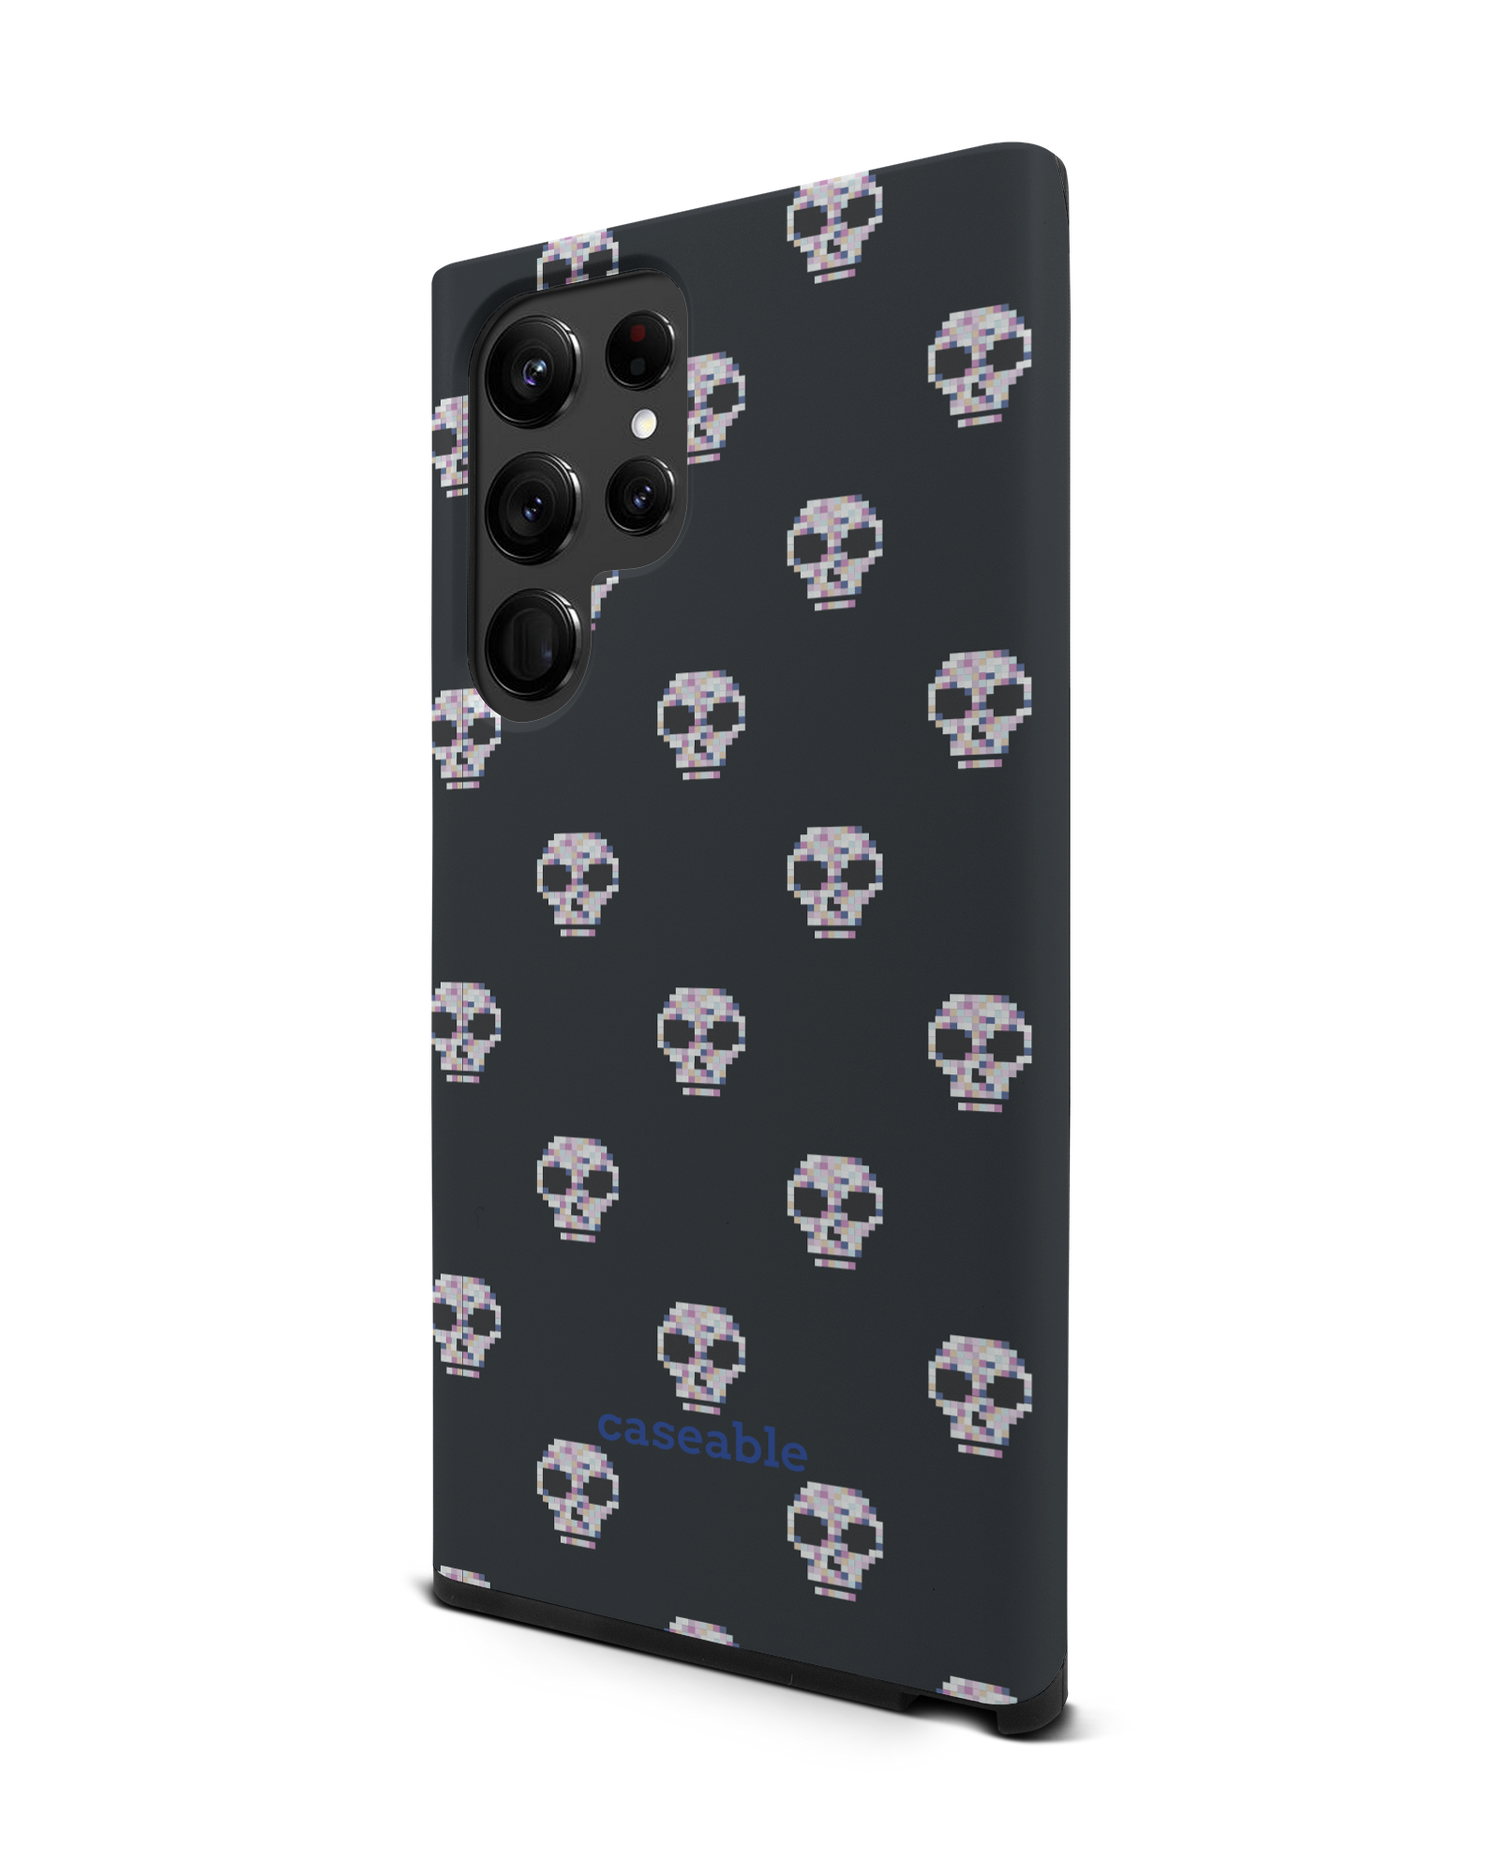 Digital Skulls Premium Phone Case Samsung Galaxy S22 Ultra 5G: View from the right side